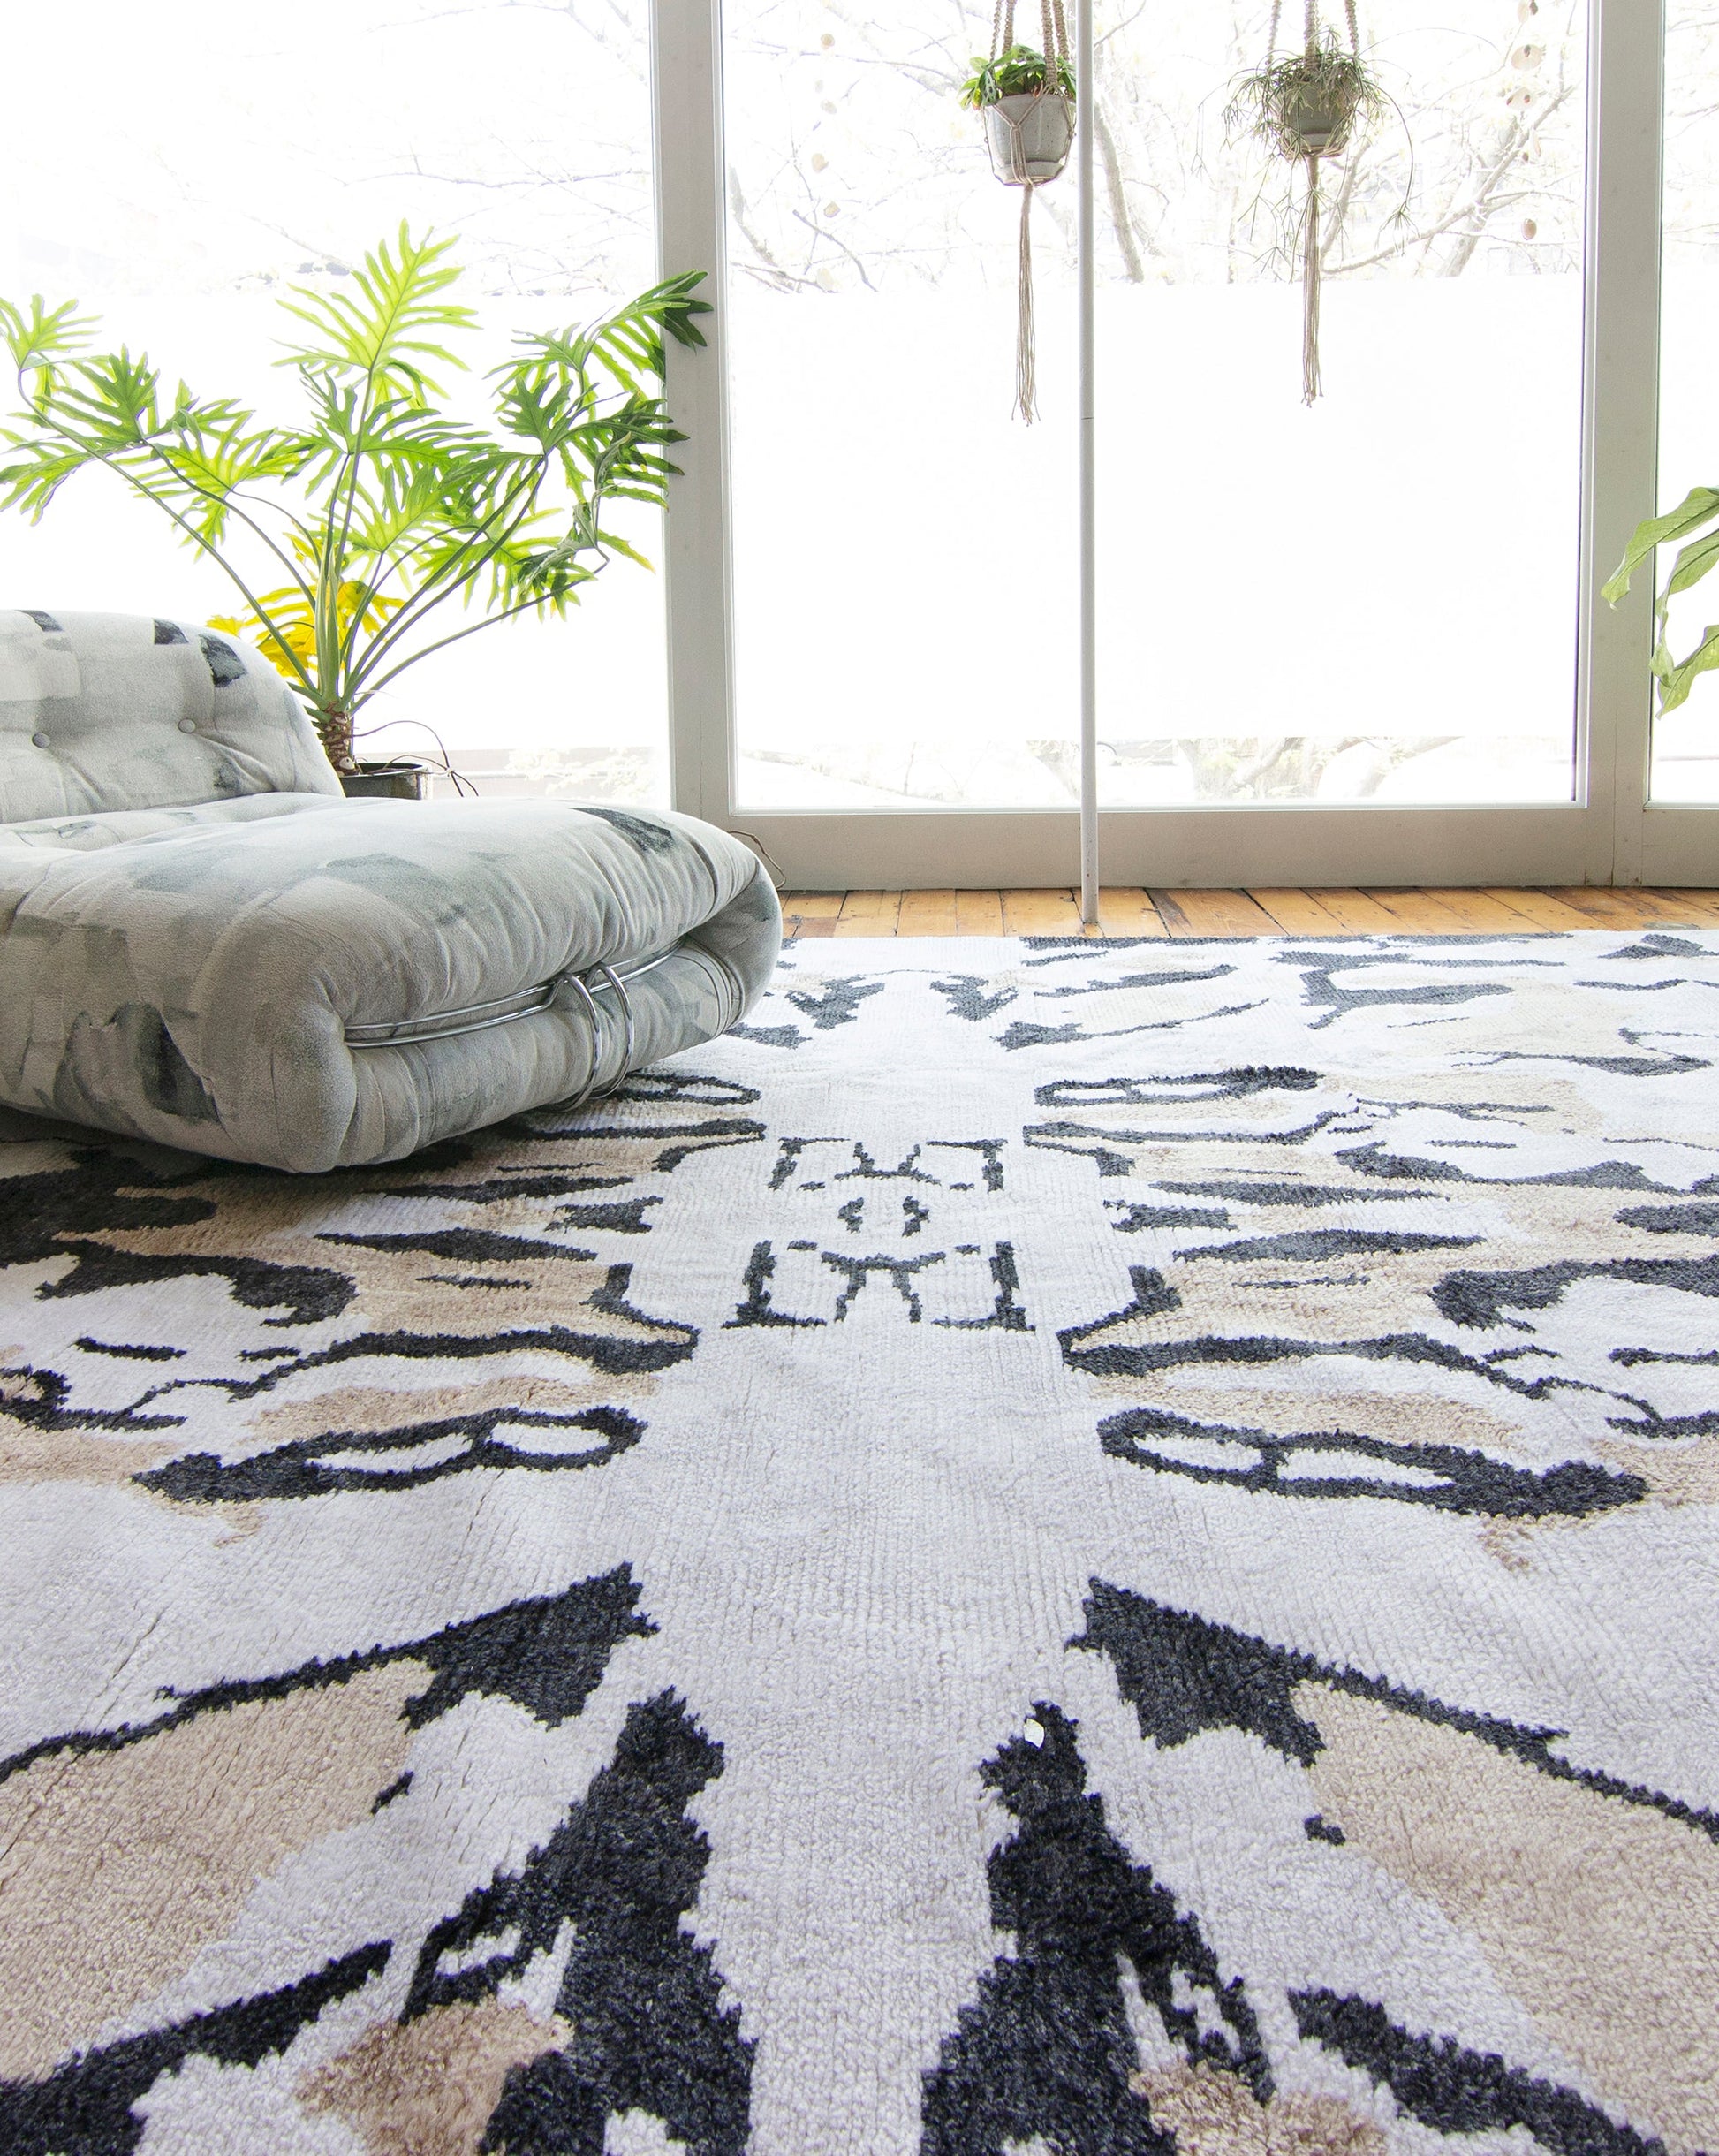 A Mamoun Hand Knotted Rug Neutral with a symmetrical abstract design in a room with a window